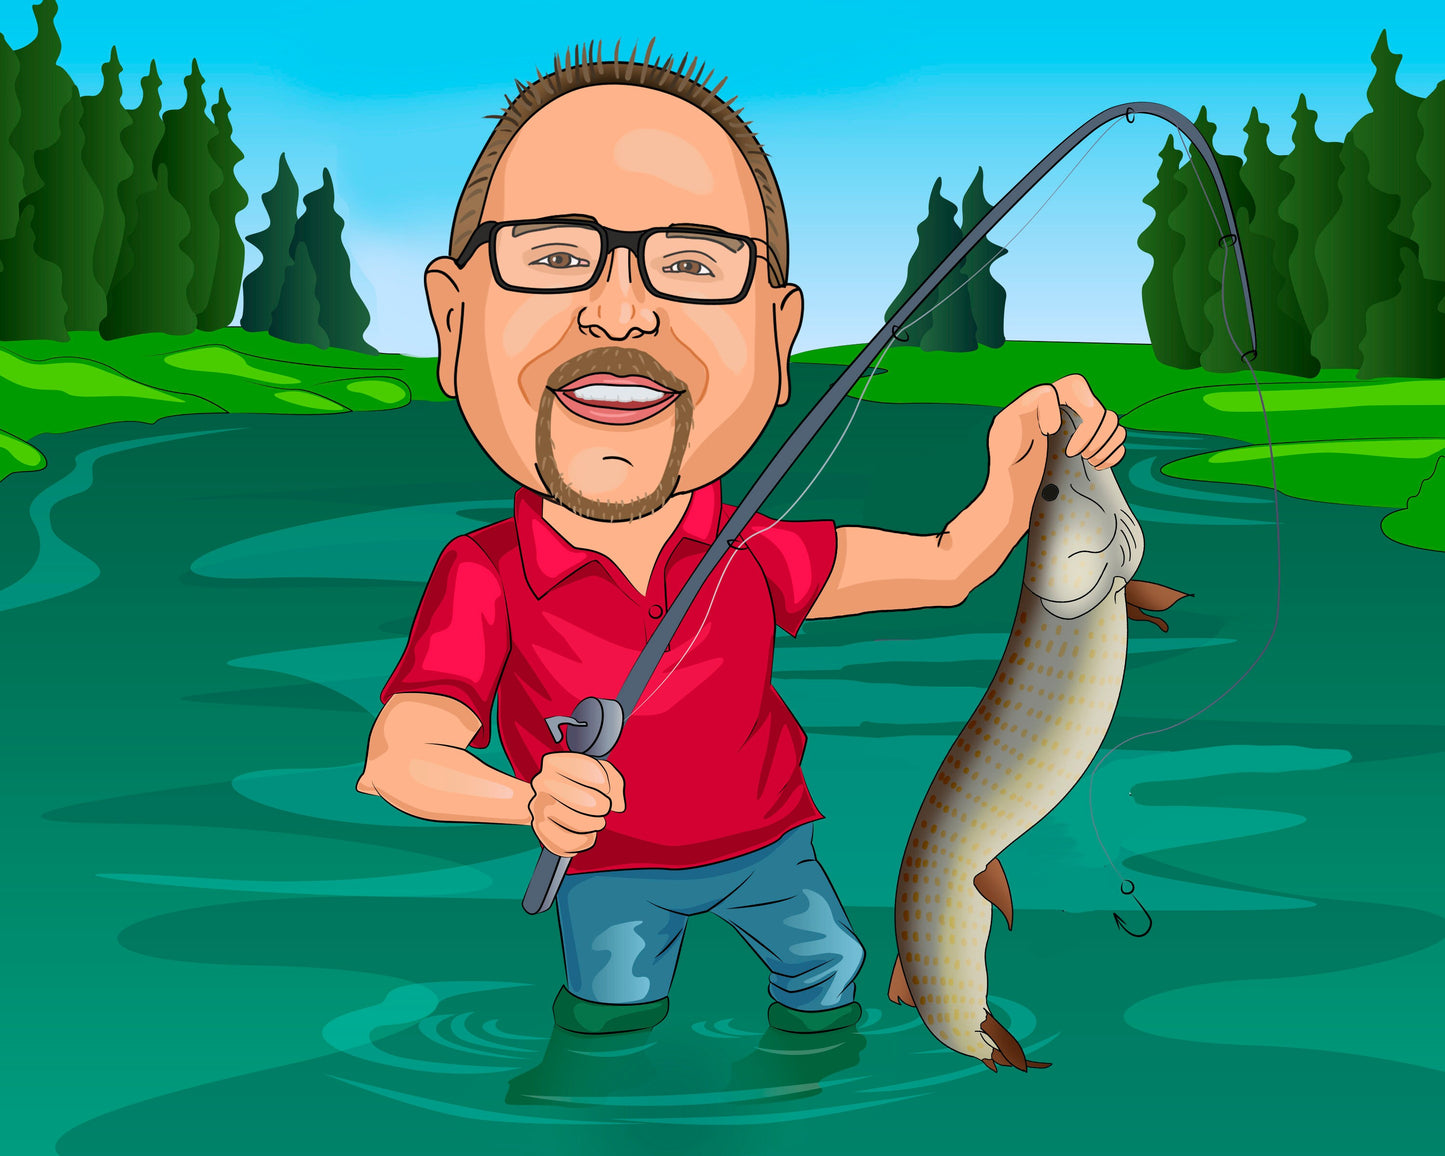 Fisherman Gift - Custom Caricature Portrait From Your Photo